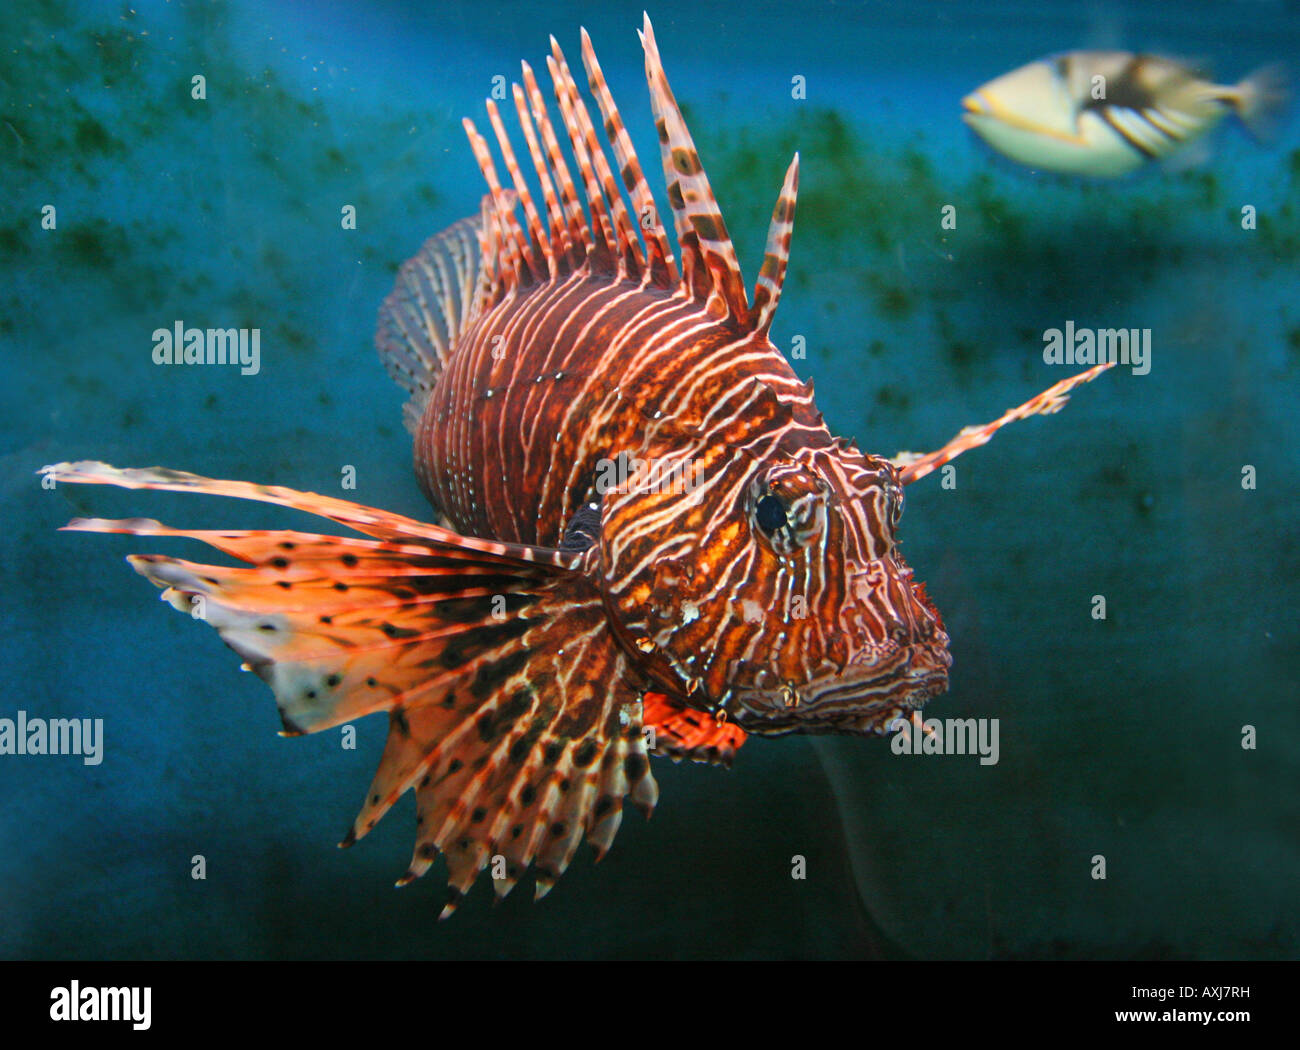 Giant Red lion fish dangerous and poisonous Stock Photo - Alamy